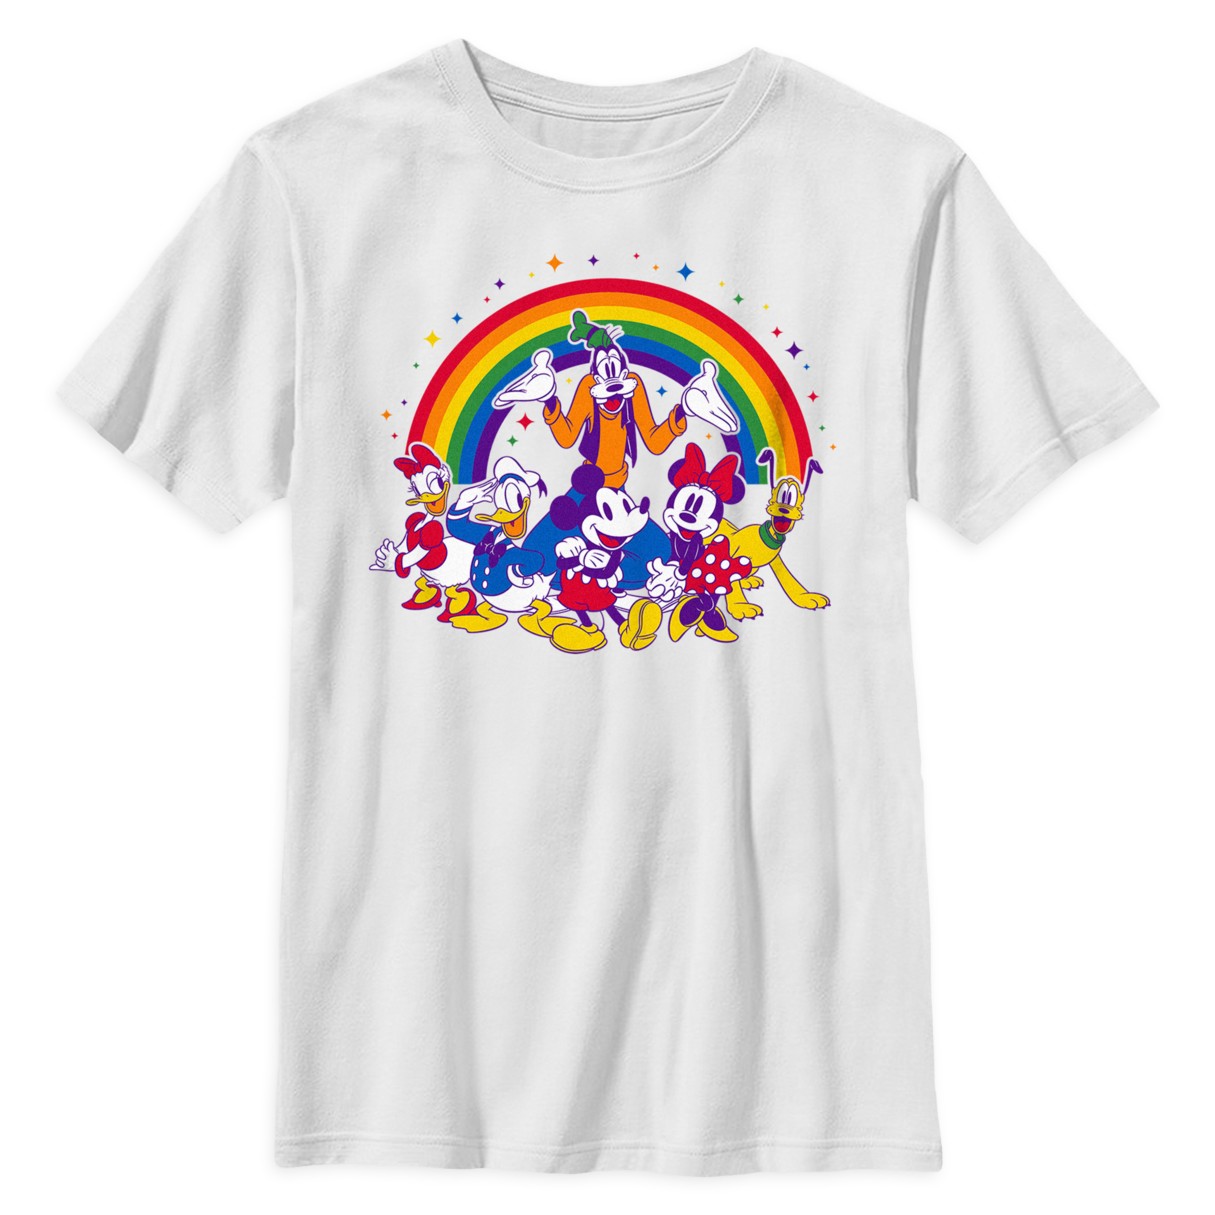 Mickey Mouse and Friends Rainbow T-Shirt for Kids – Disney Pride Collection